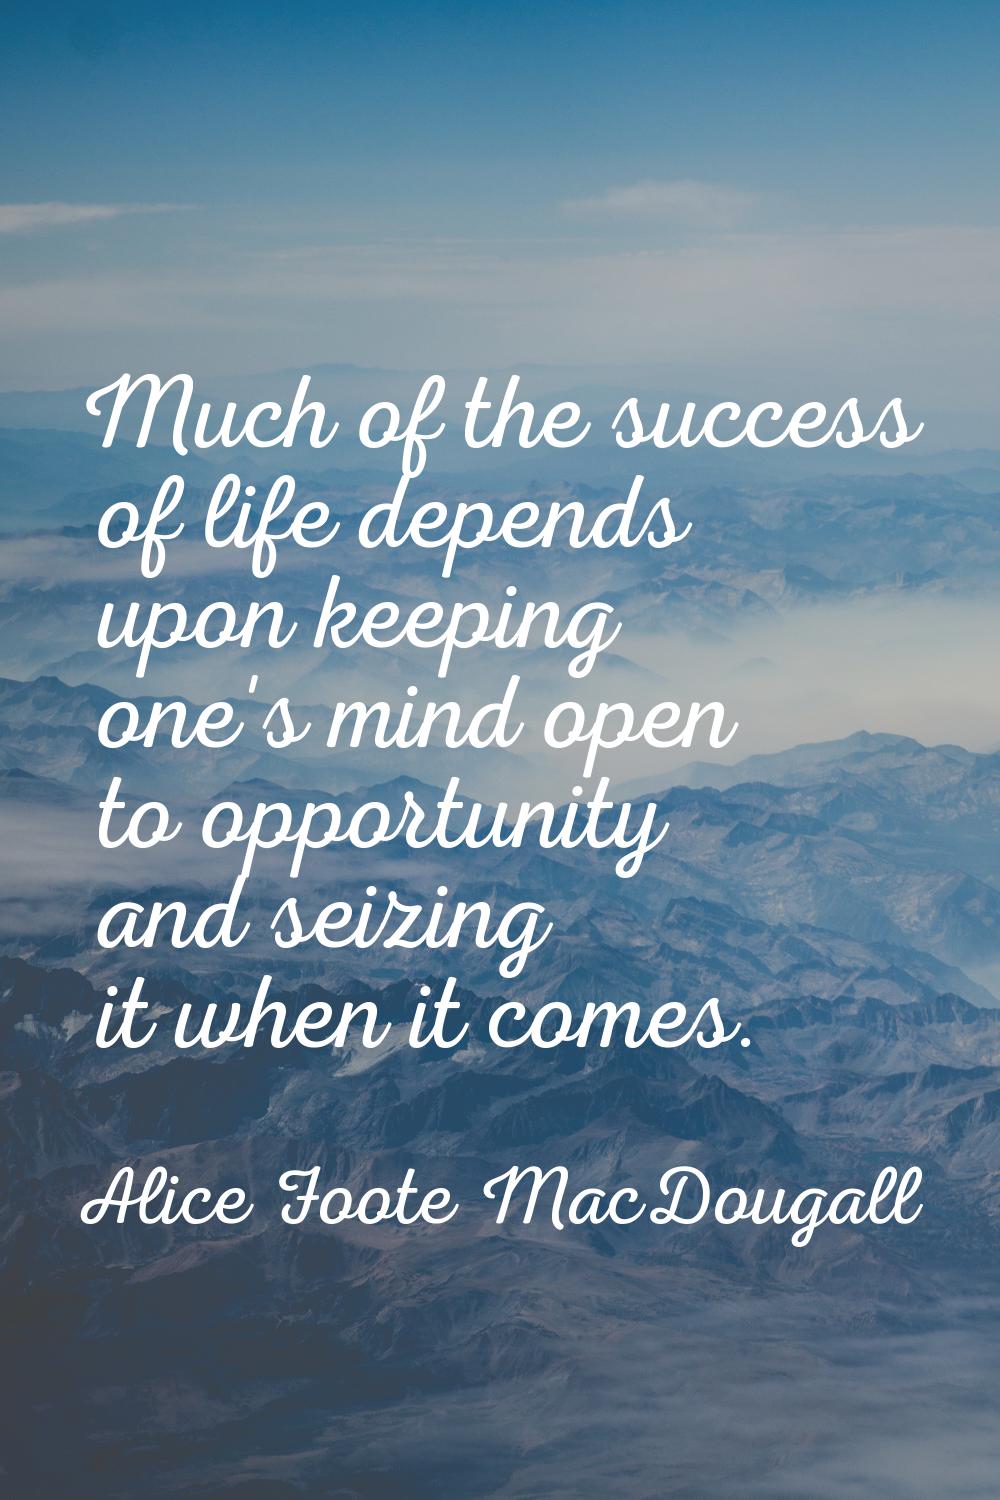 Much of the success of life depends upon keeping one's mind open to opportunity and seizing it when